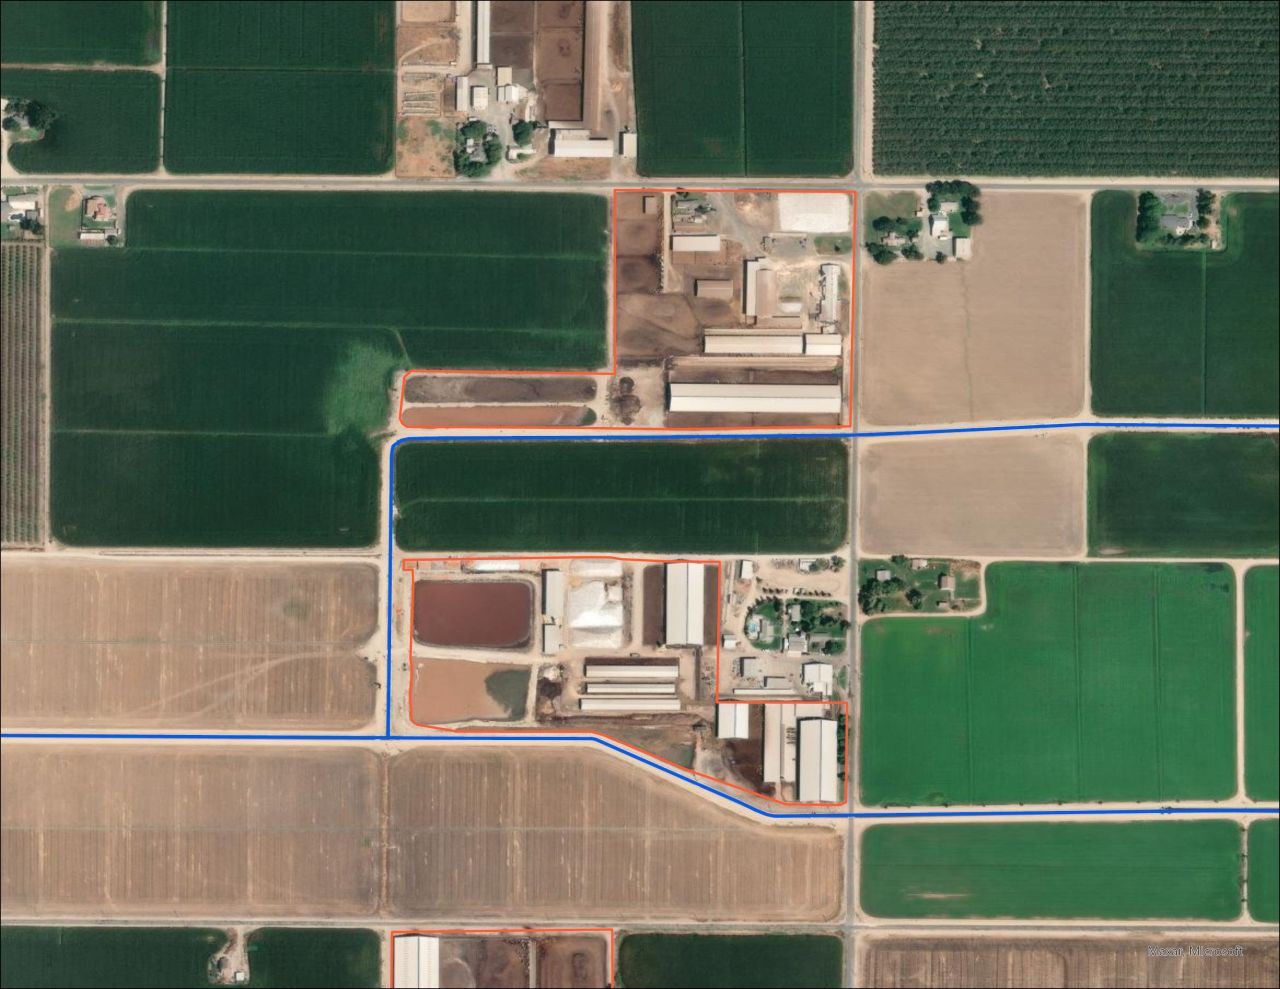 Zoomed out view of above image, with CAFOs outlined in orange and irrigation canals indicated in blue.